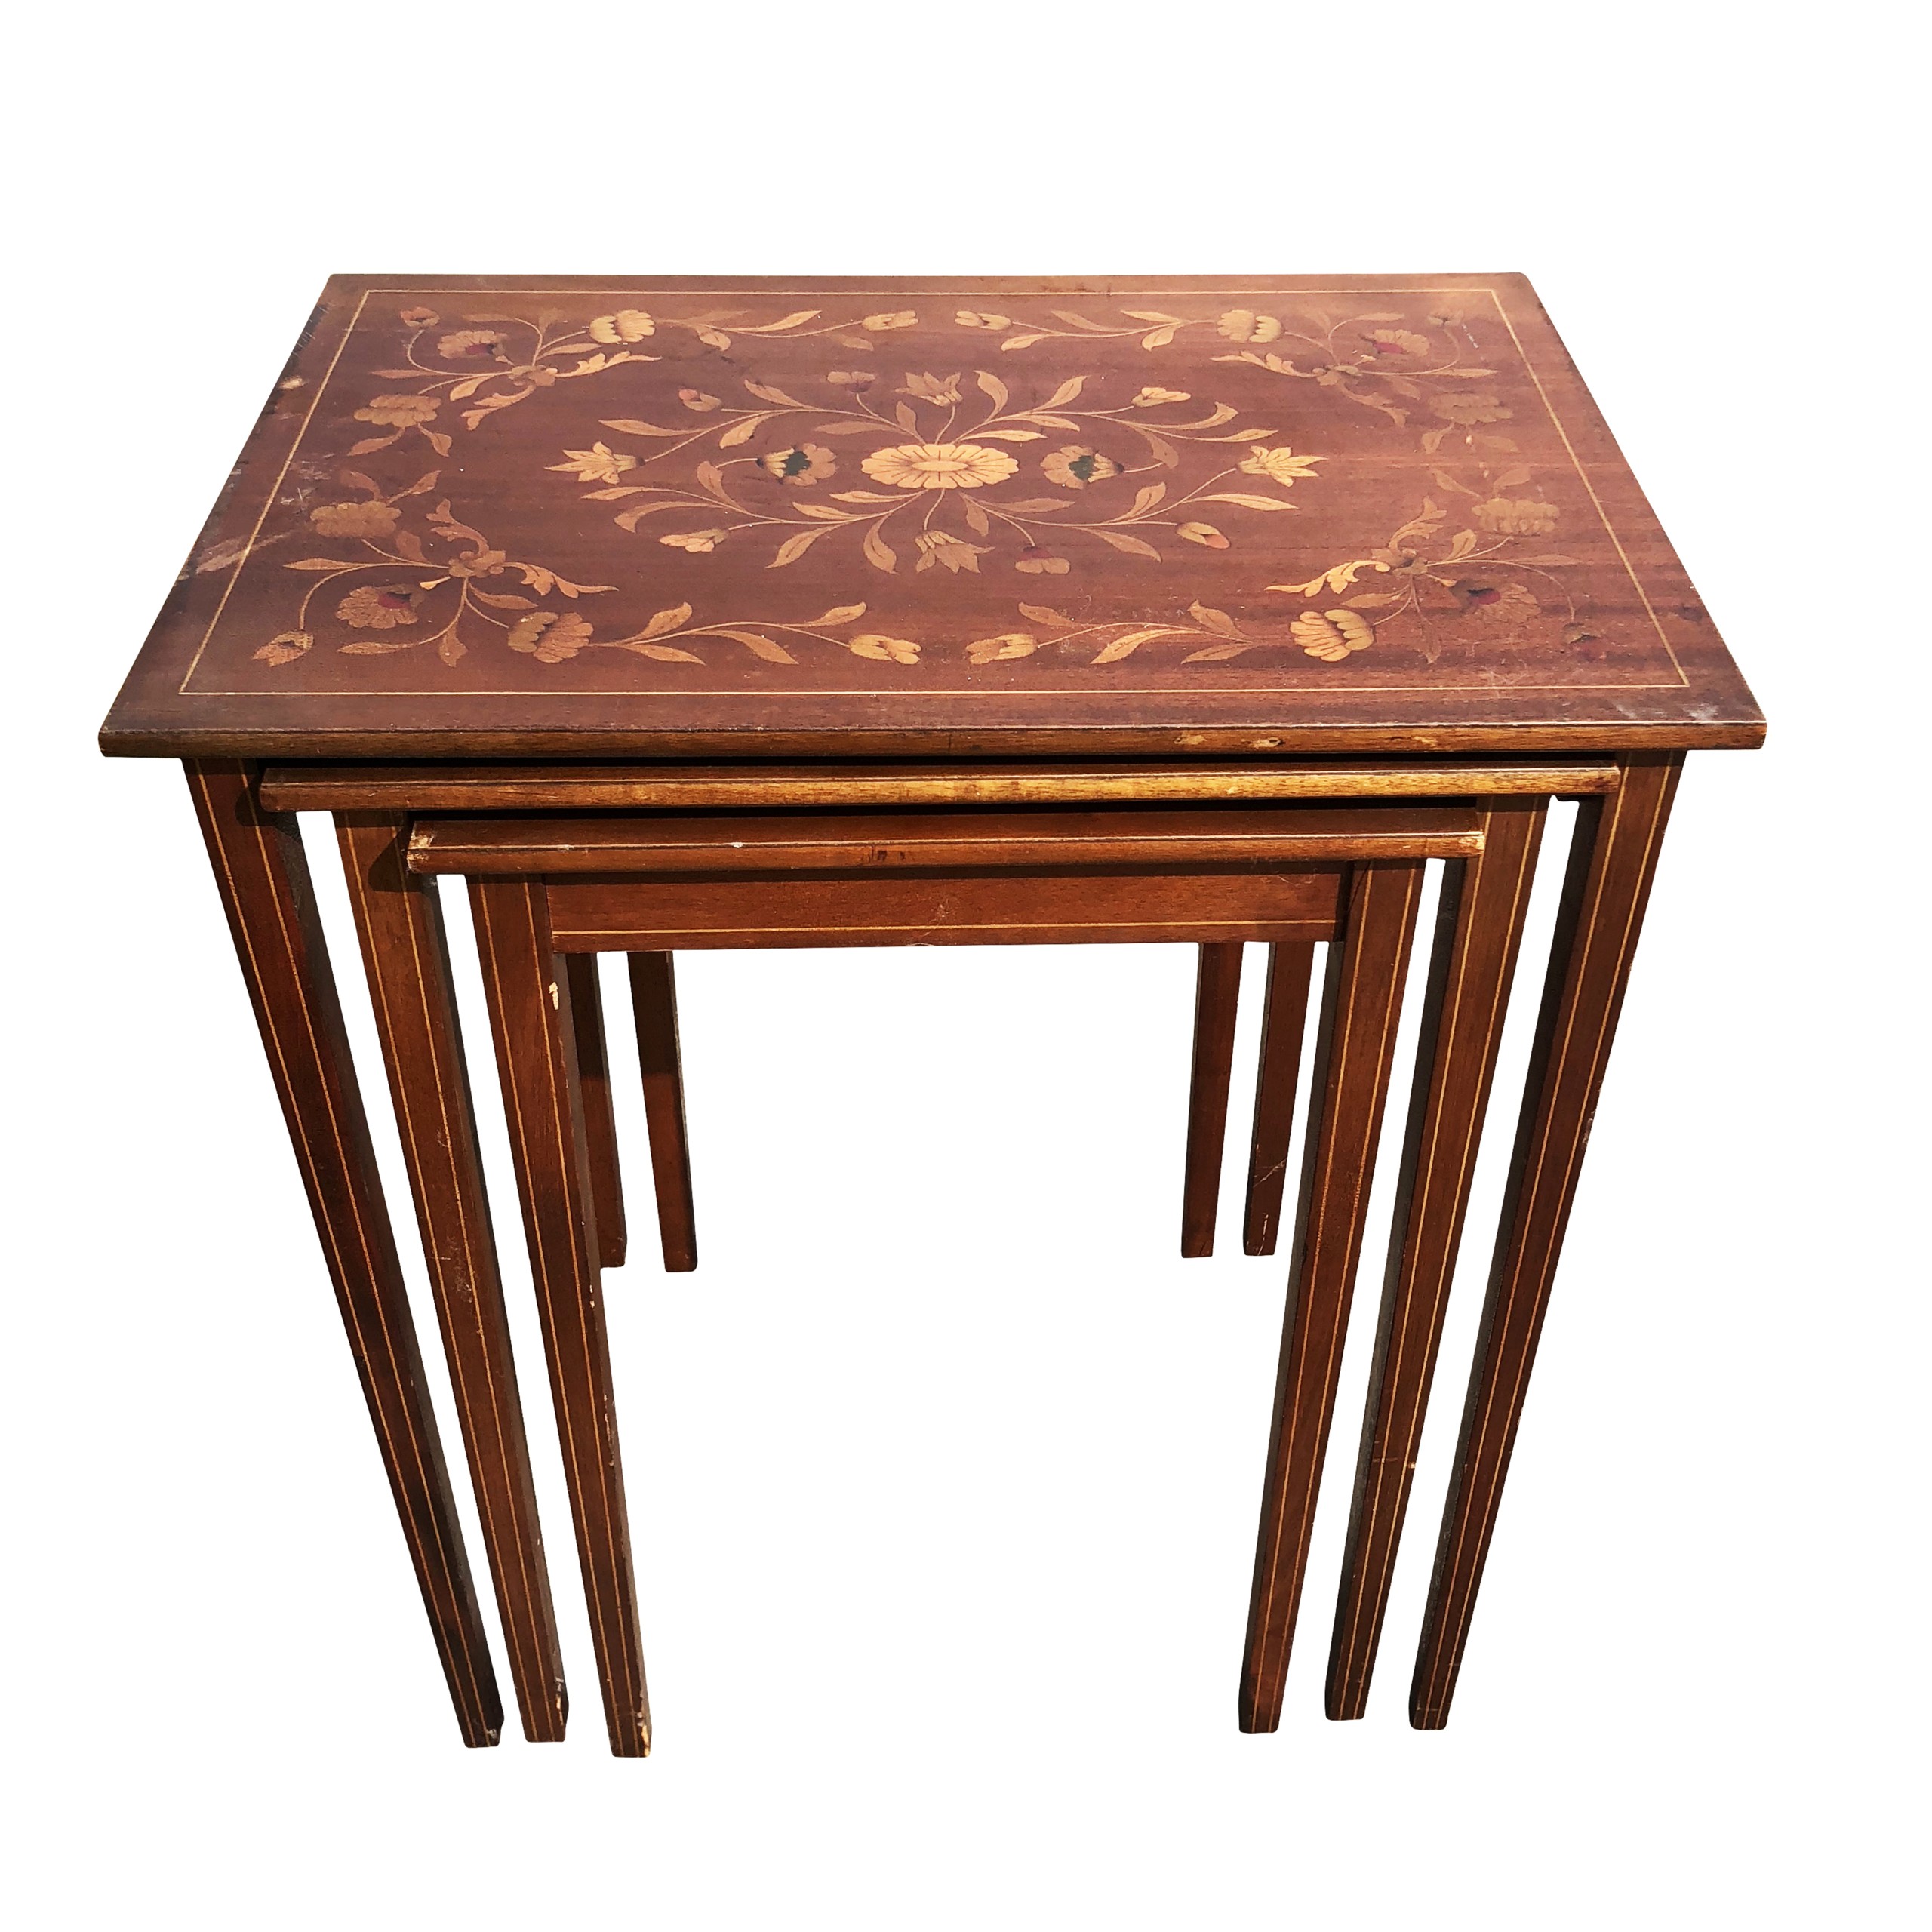 Antique inlaid walnut french motif nesting tables by flint